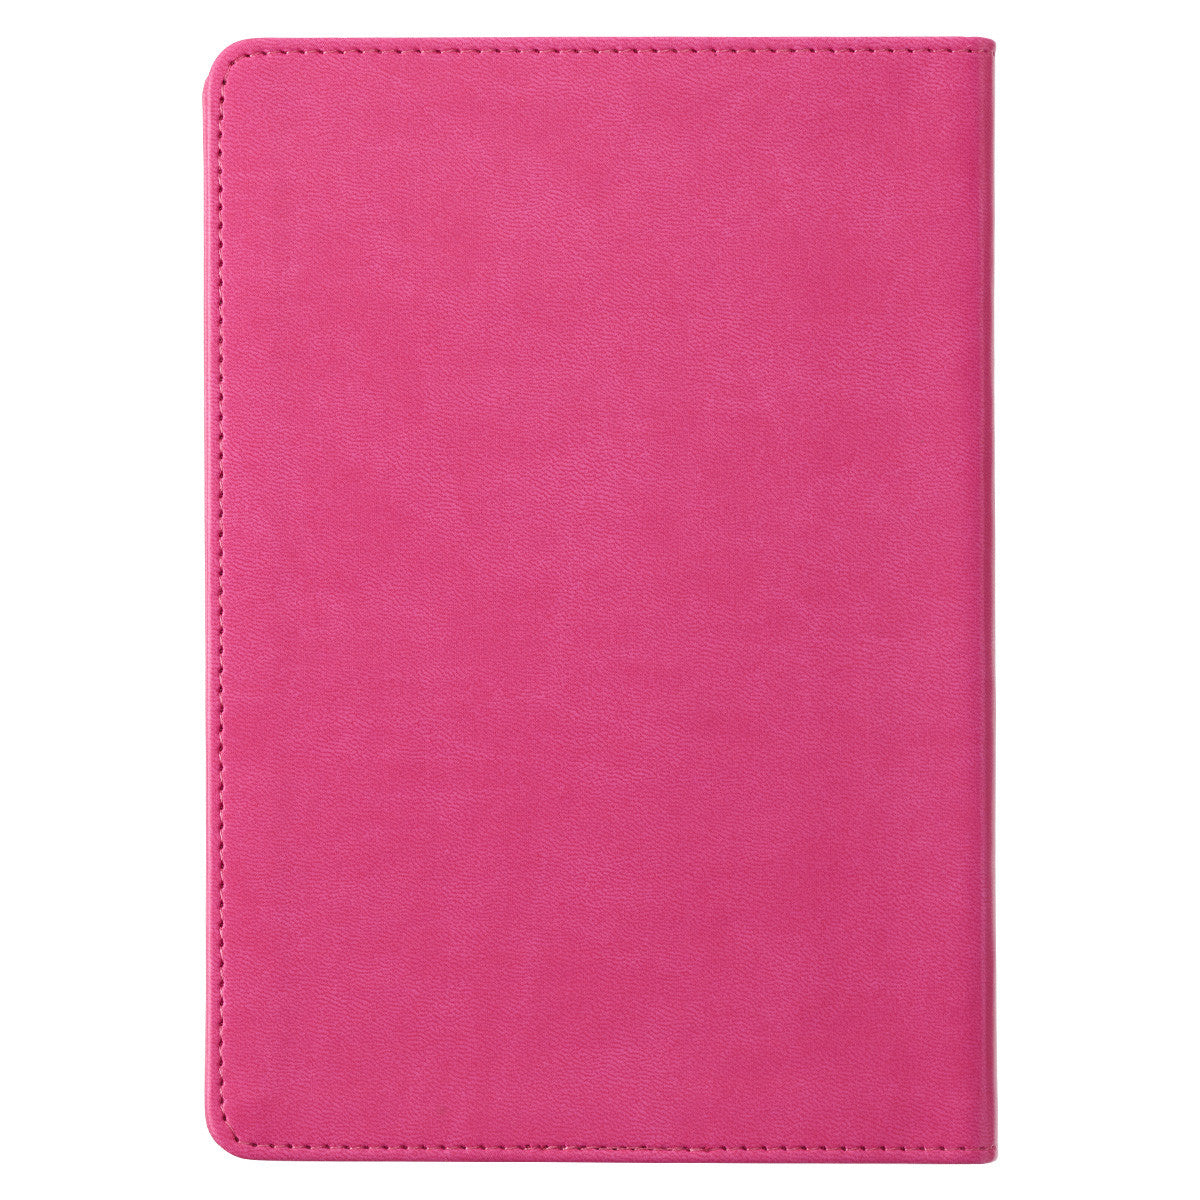 Grateful Heart Pink Faux Leather Classic Journal - The Christian Gift Company